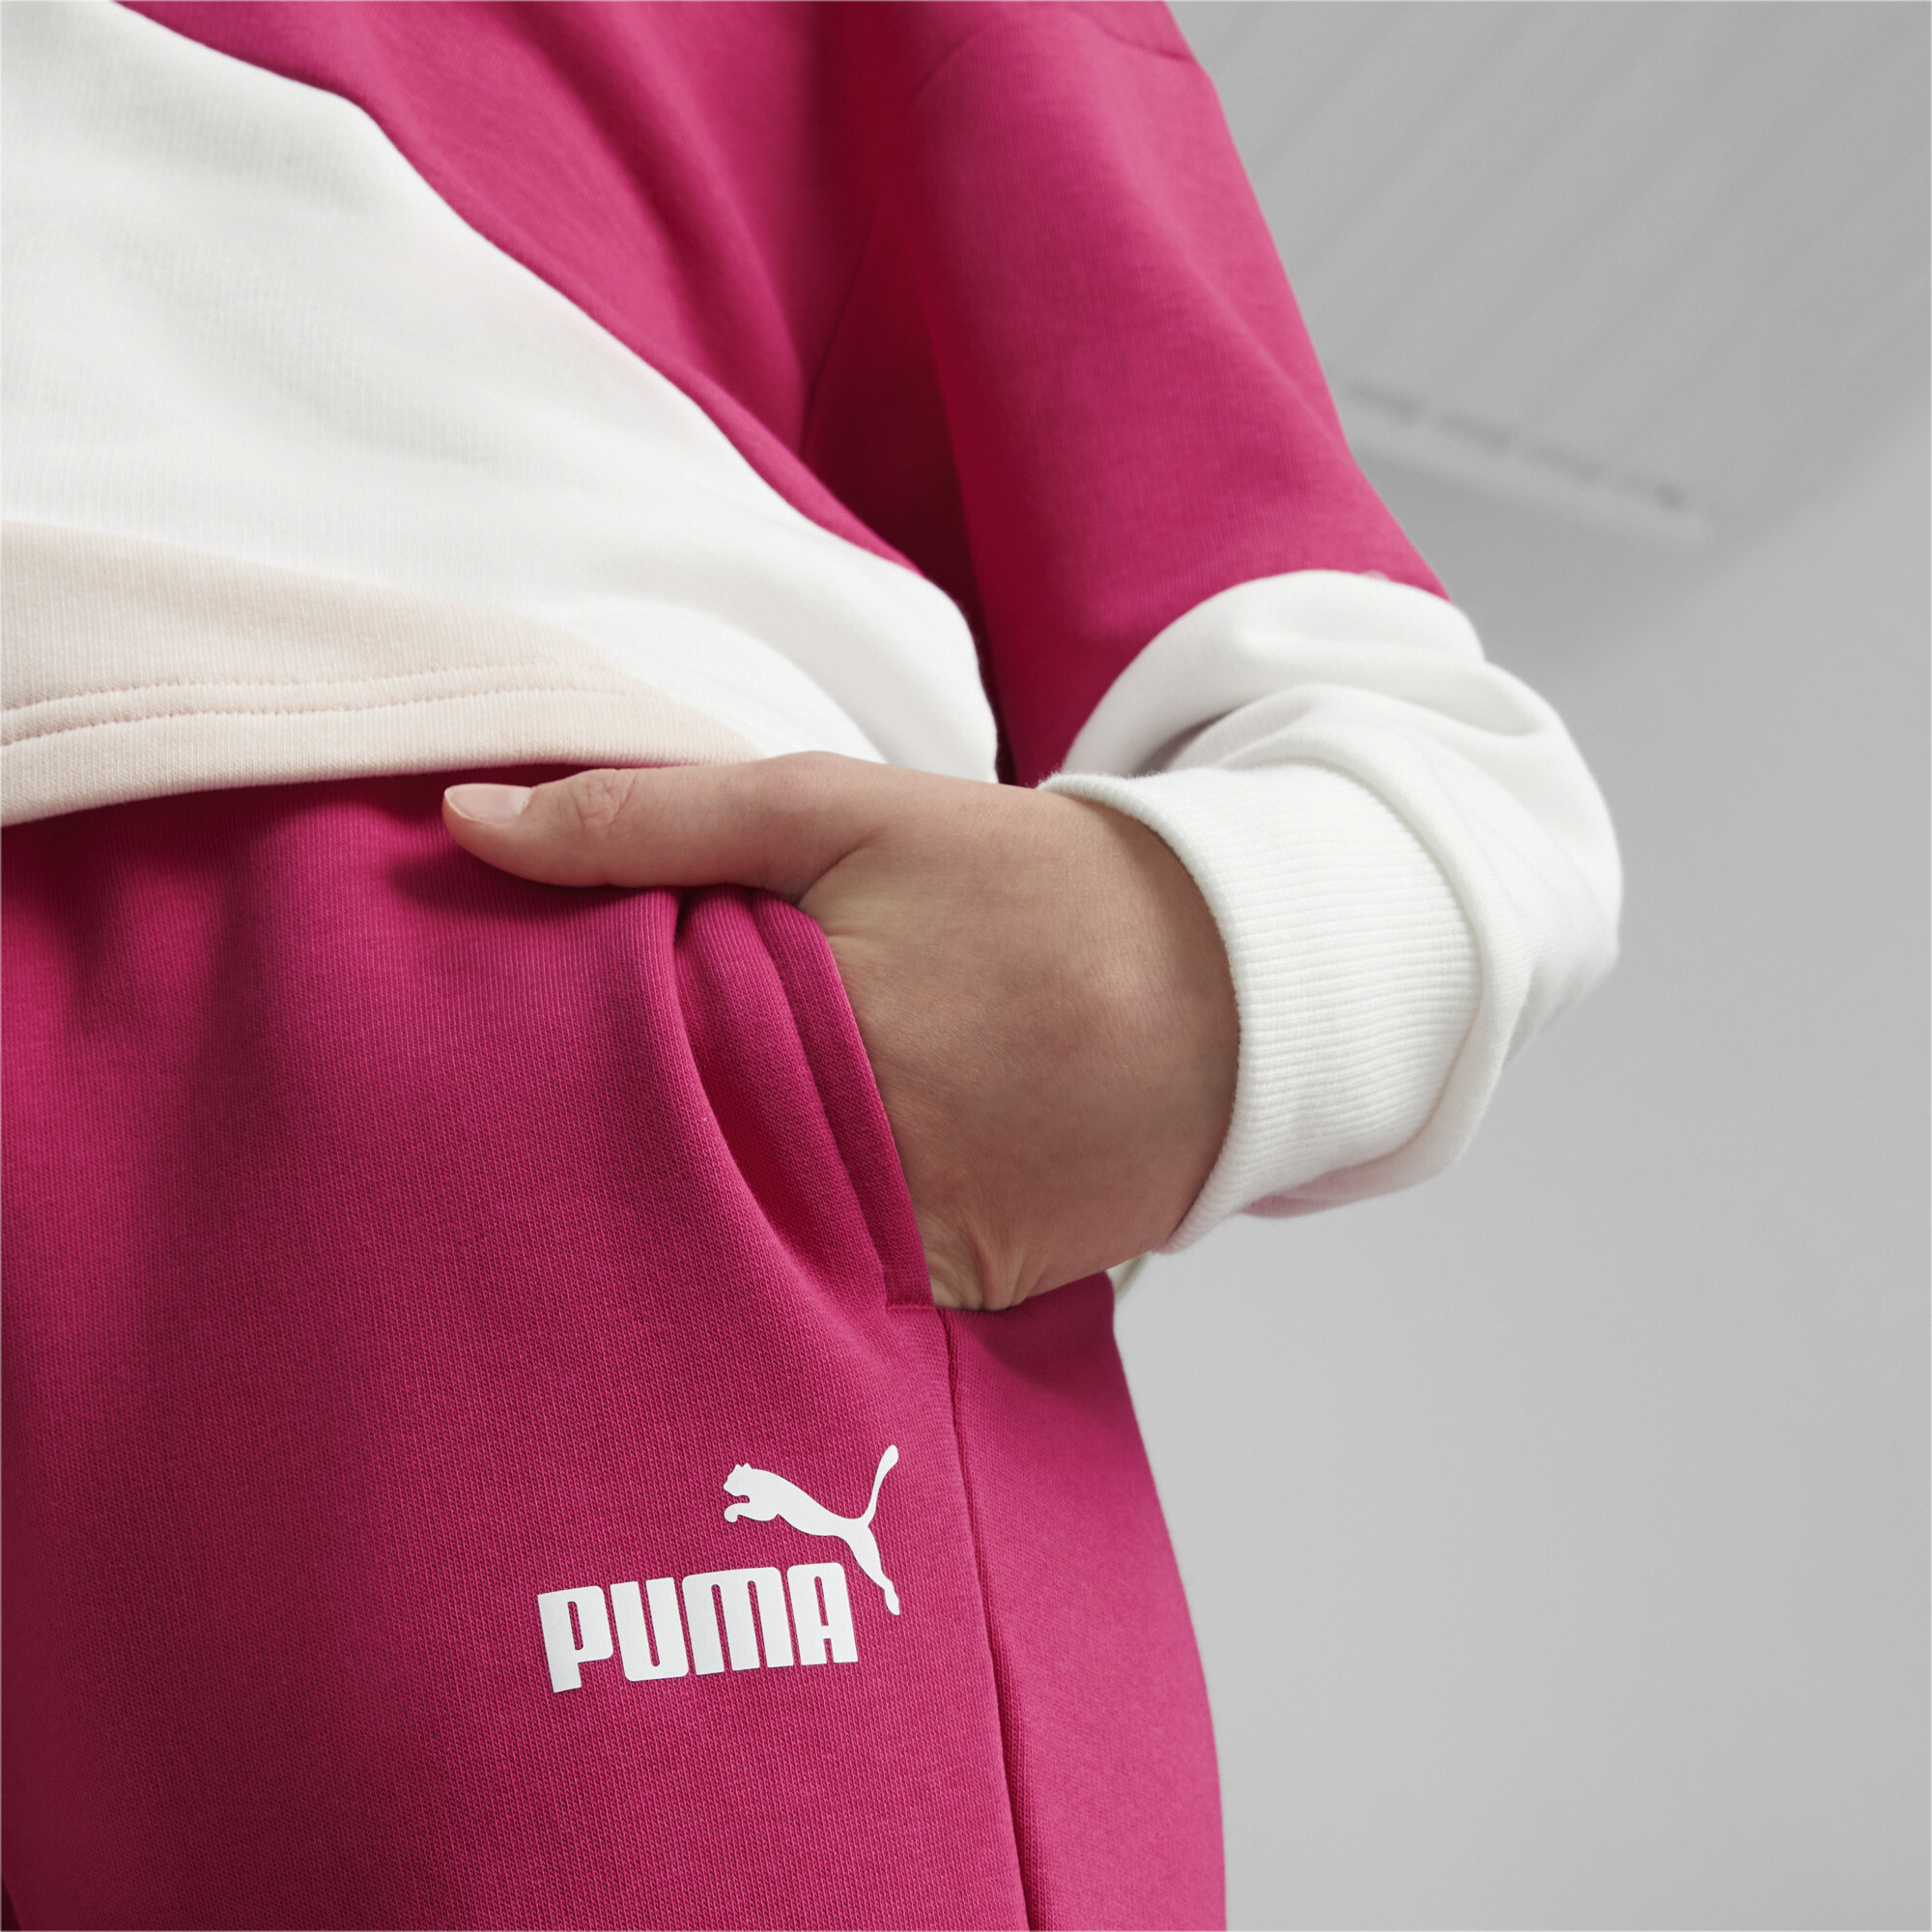 PUMA POWER Cat Pants In Pink, Size 15-16 Youth